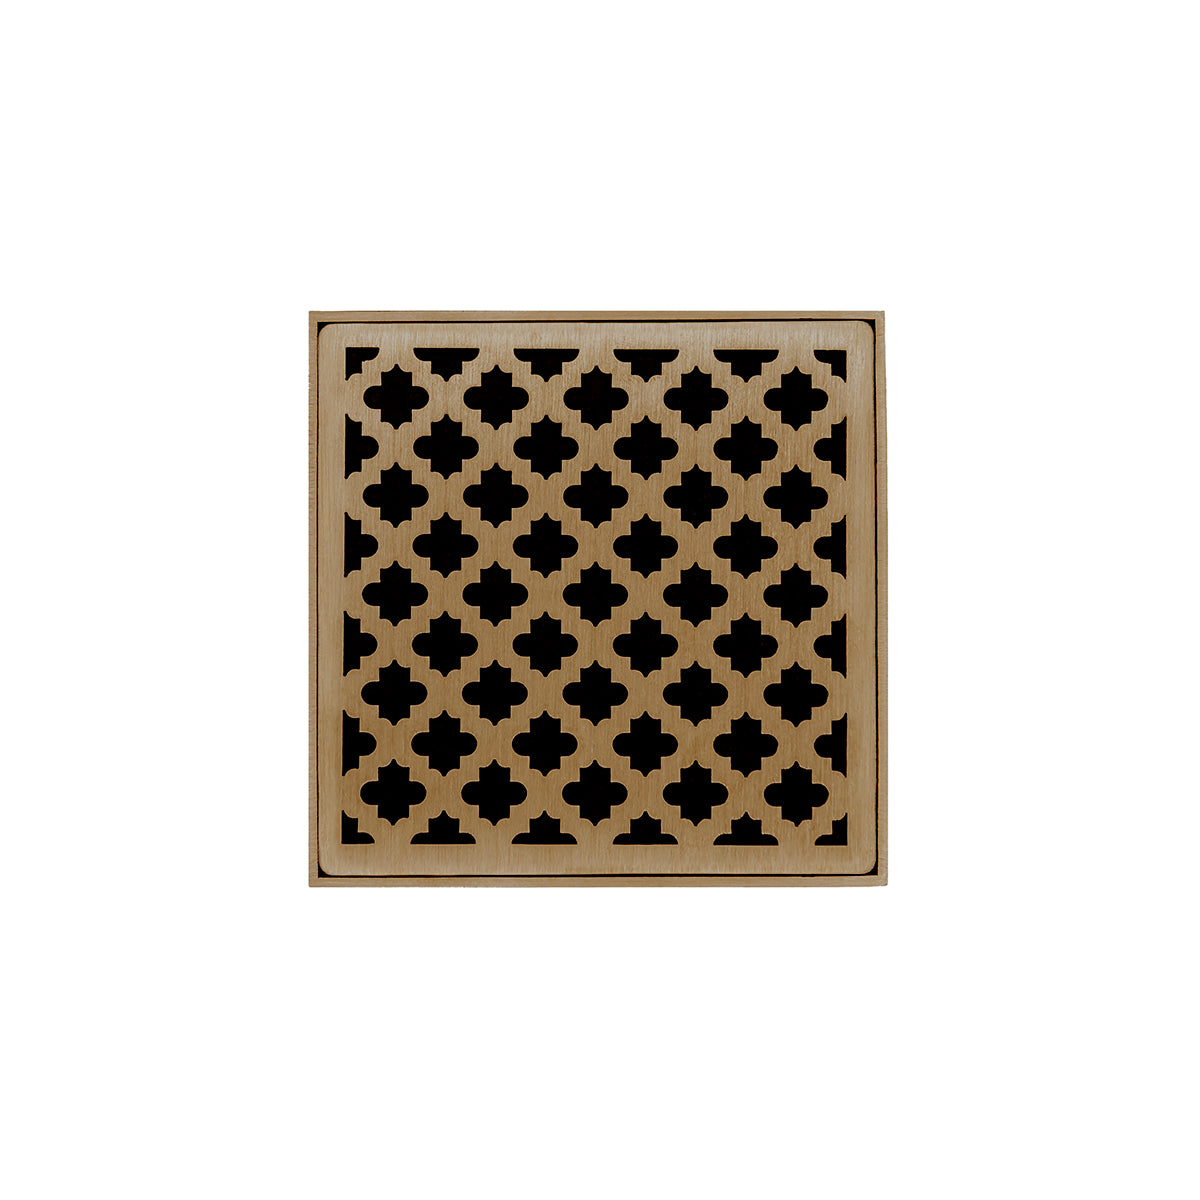 Infinity Drain 5" x 5" MD 5 Premium Center Drain Kit with Moor Pattern Decorative Plate with Cast Iron Drain Body, 2" Outlet